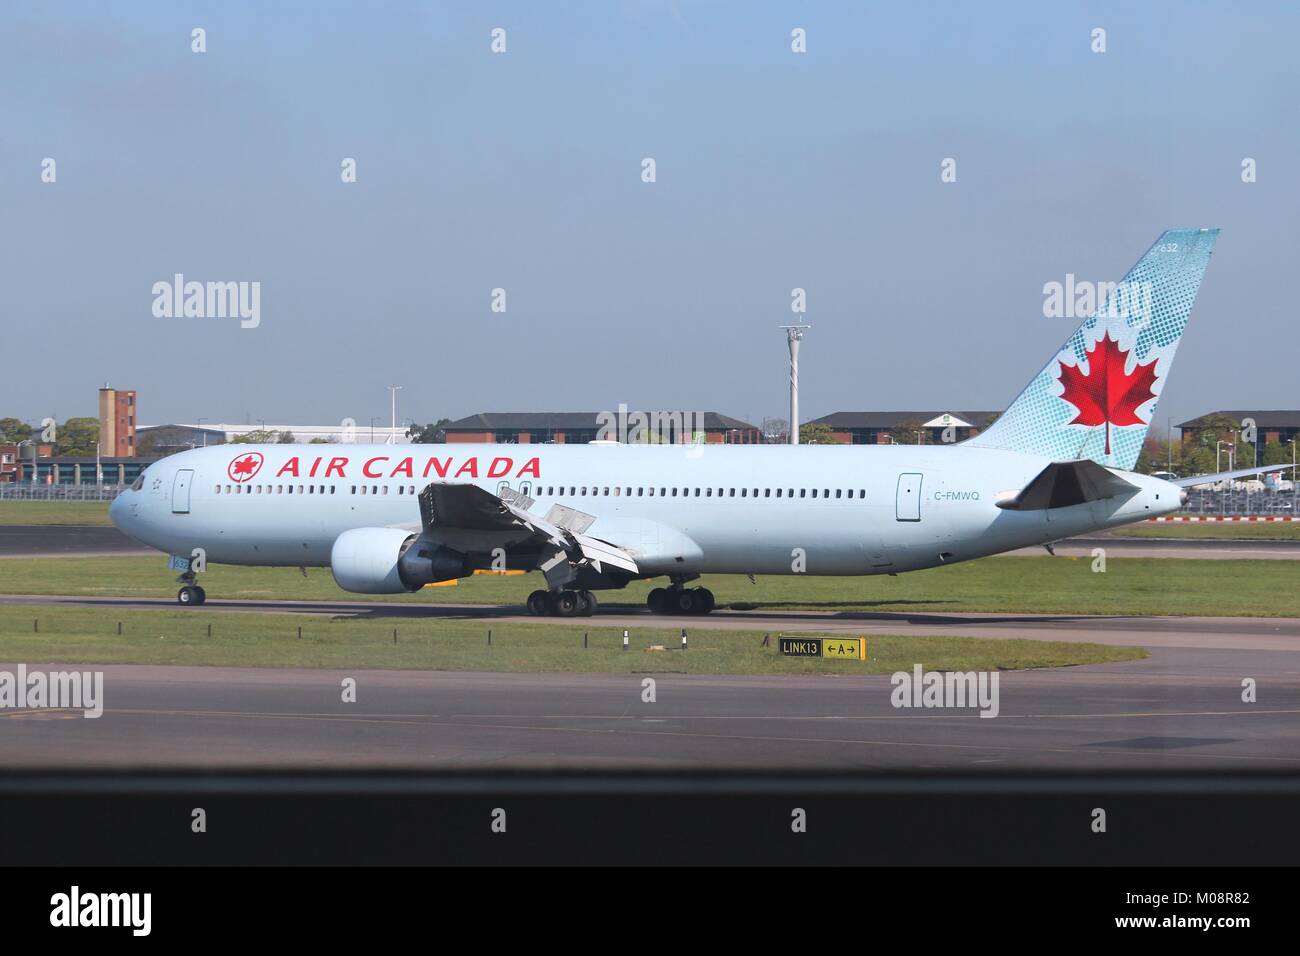 LONDON, UK - APRIL 16, 2014: Air Canada Boeing 767 after landing at London Heathrow airport. Air Canada is the largest airline of Canada with 35.8 mil Stock Photo